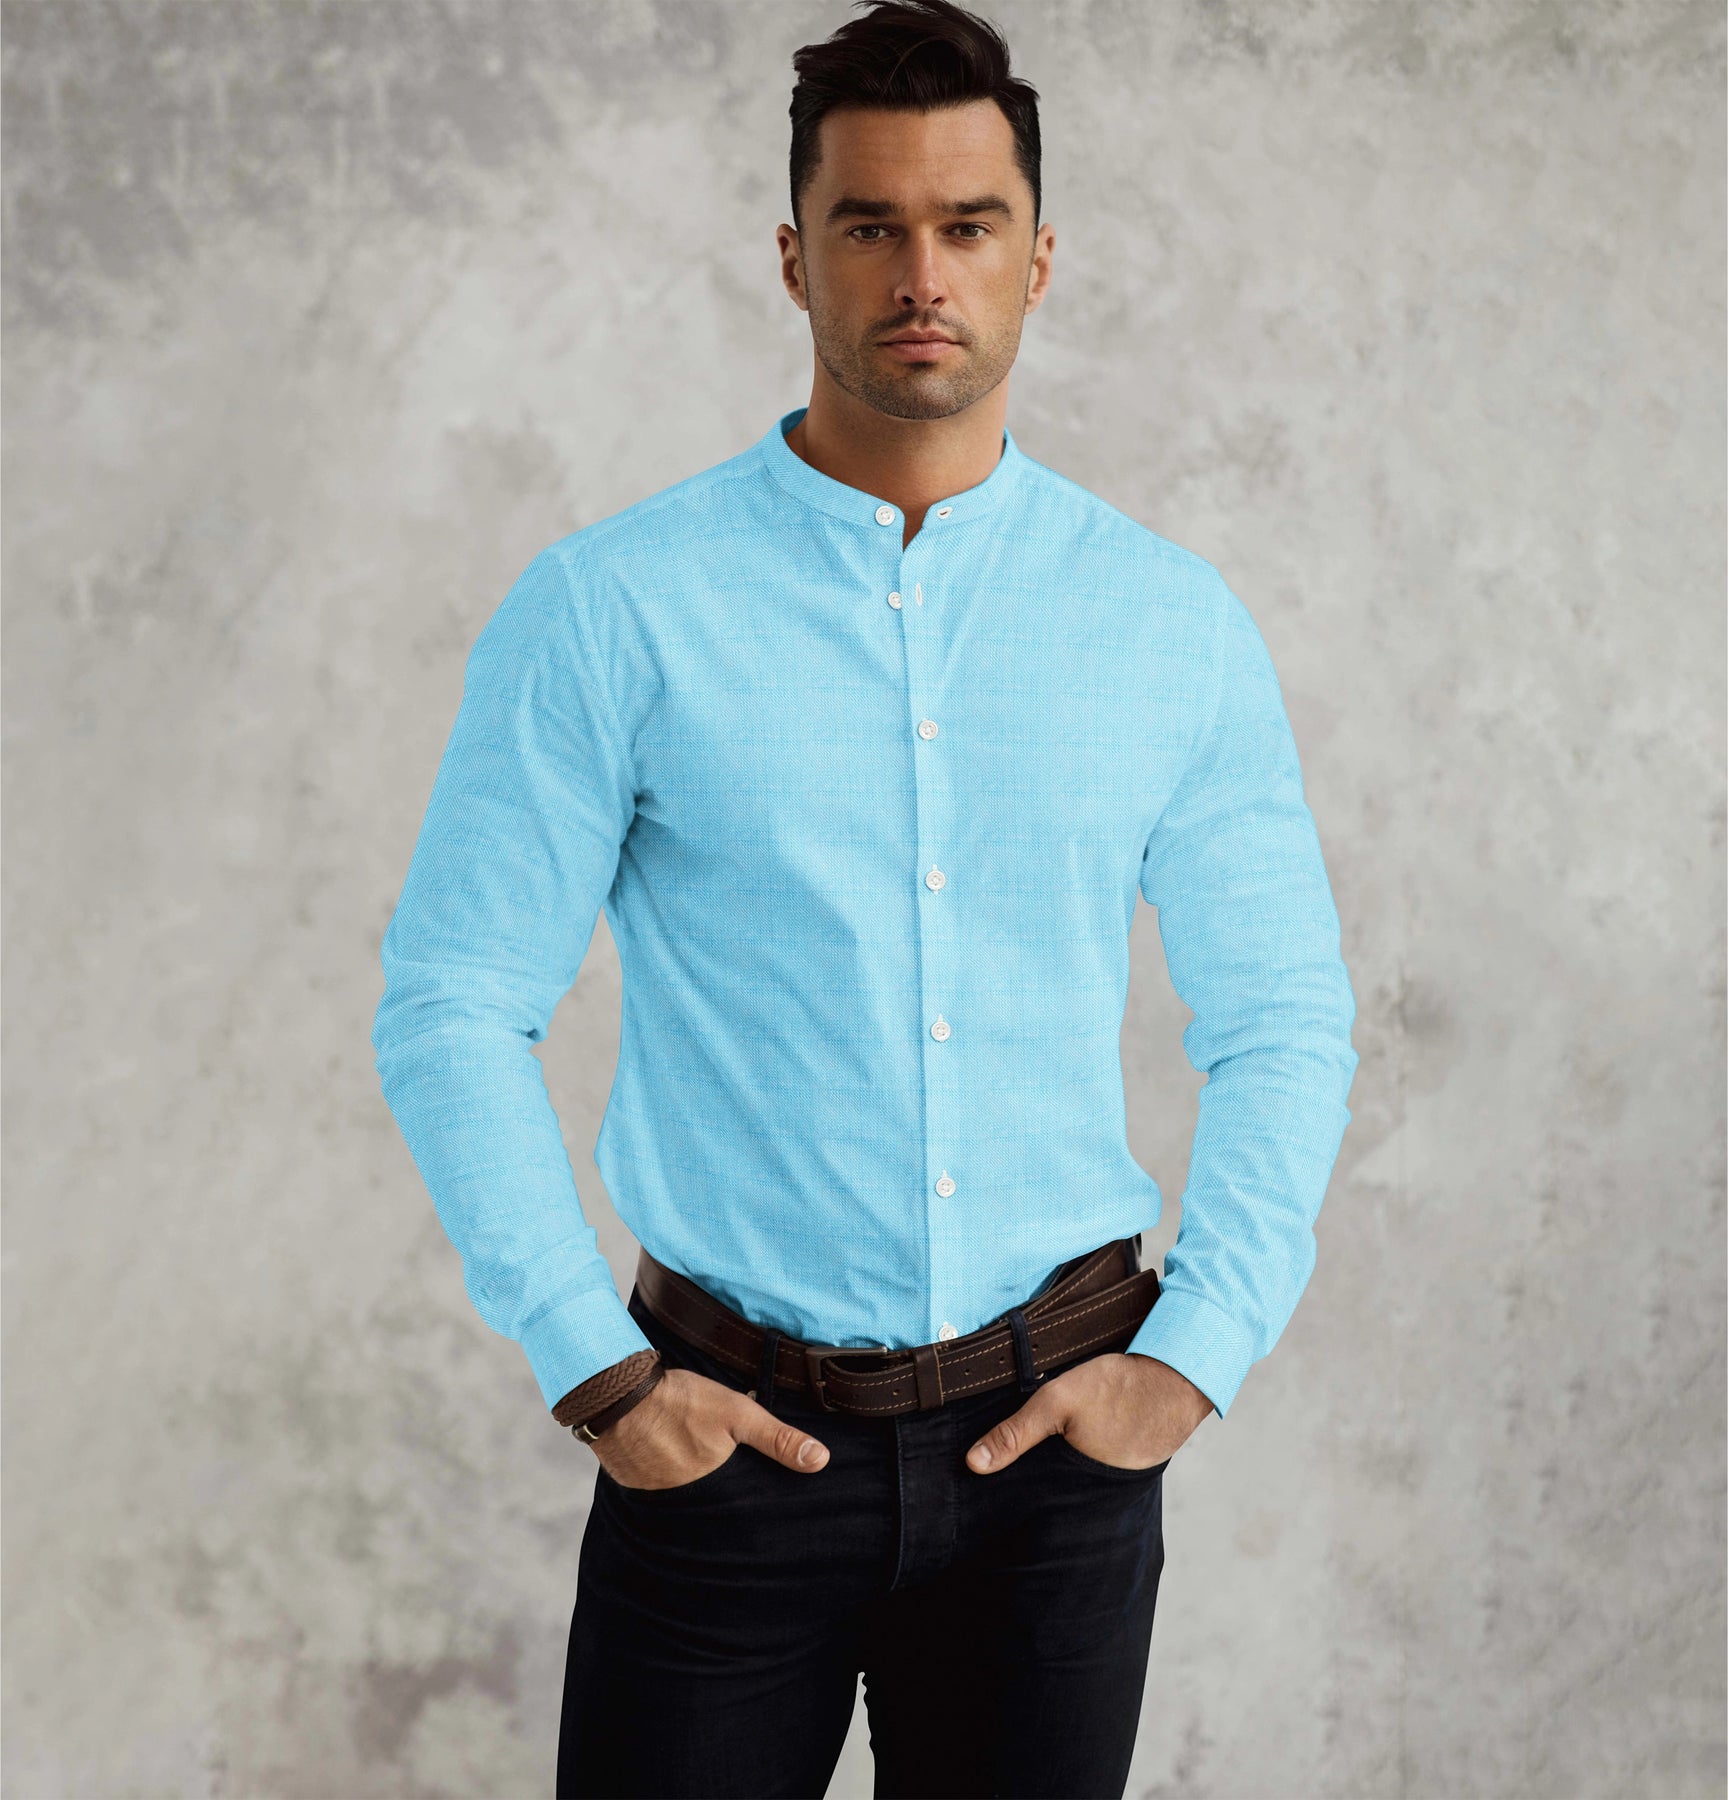 Long Sleeve Band Collar Shirt in Blue Color